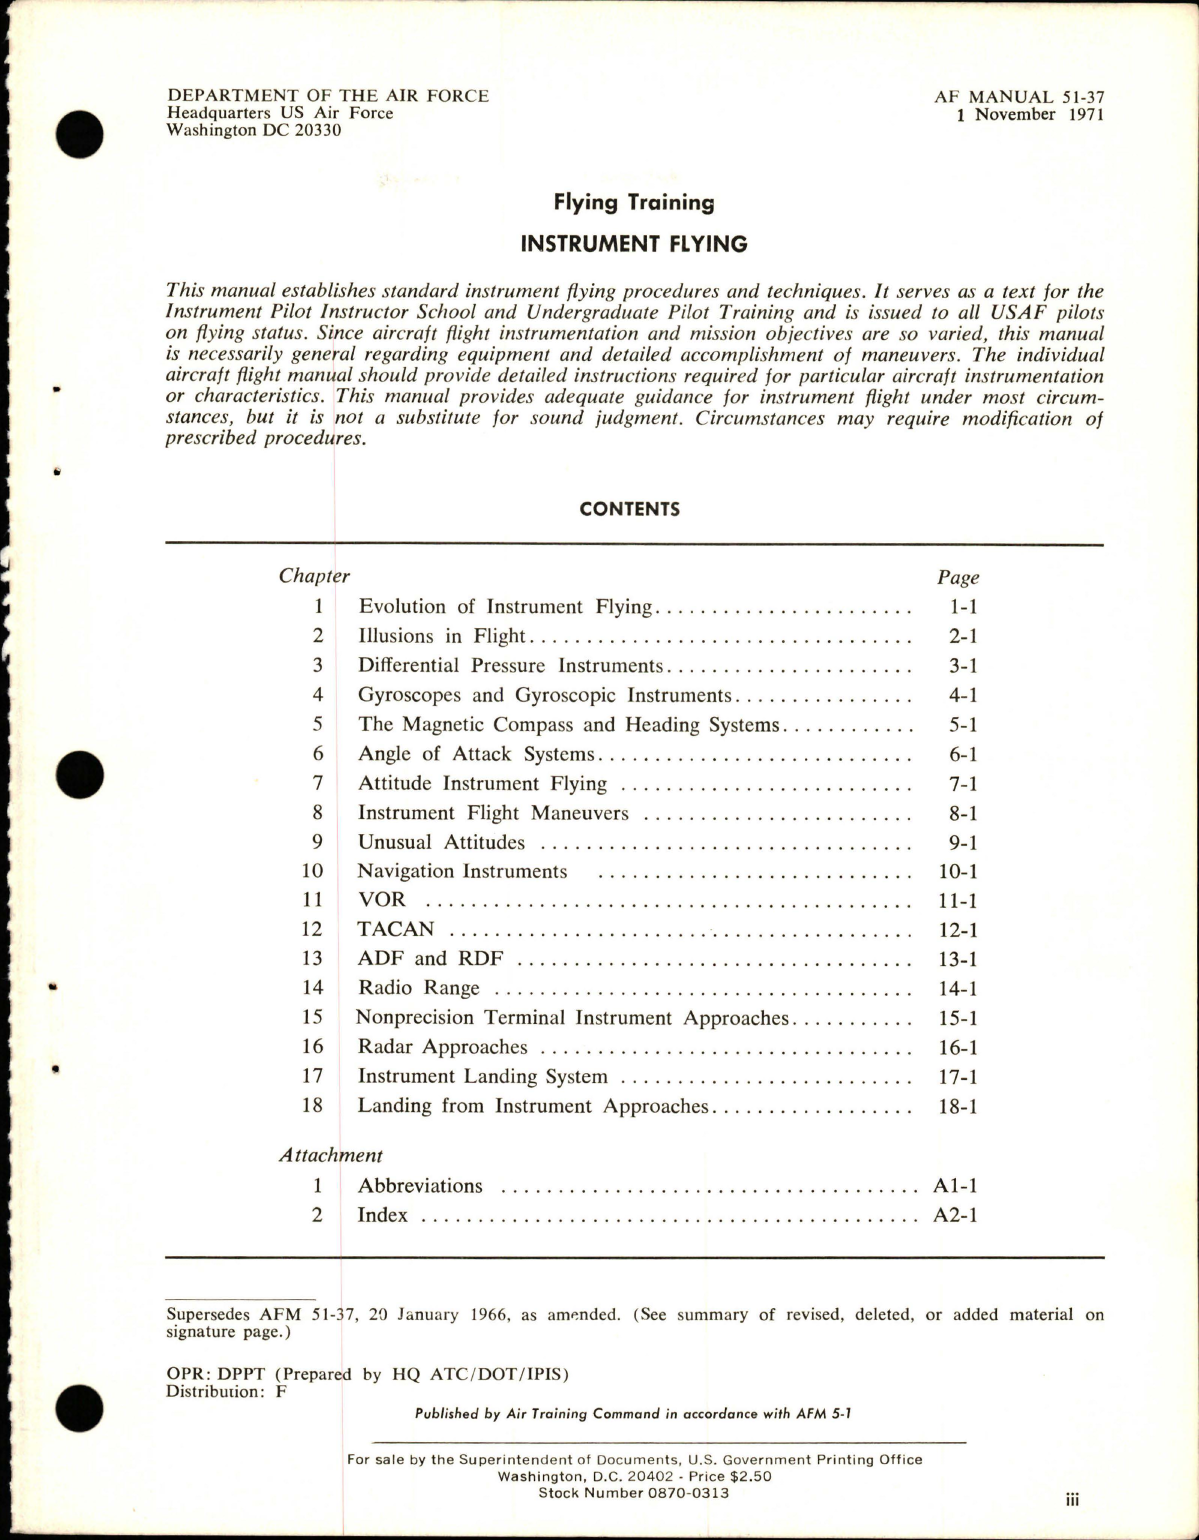 Sample page 5 from AirCorps Library document: Flying Training for Instrument Flying